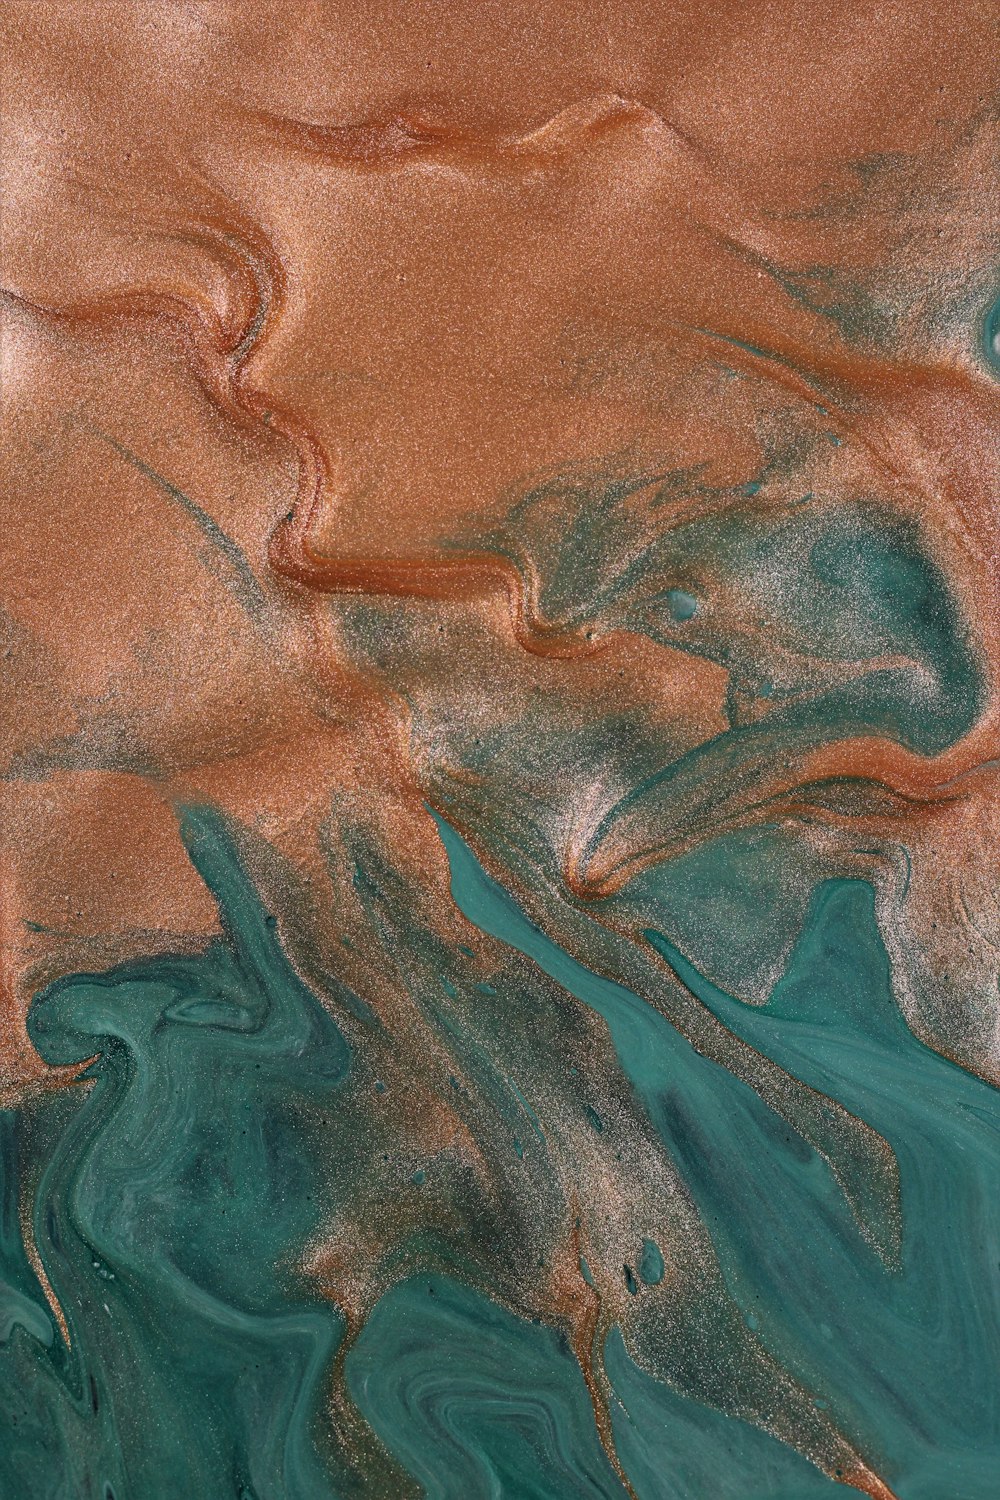 a close up of a water surface with brown and blue colors